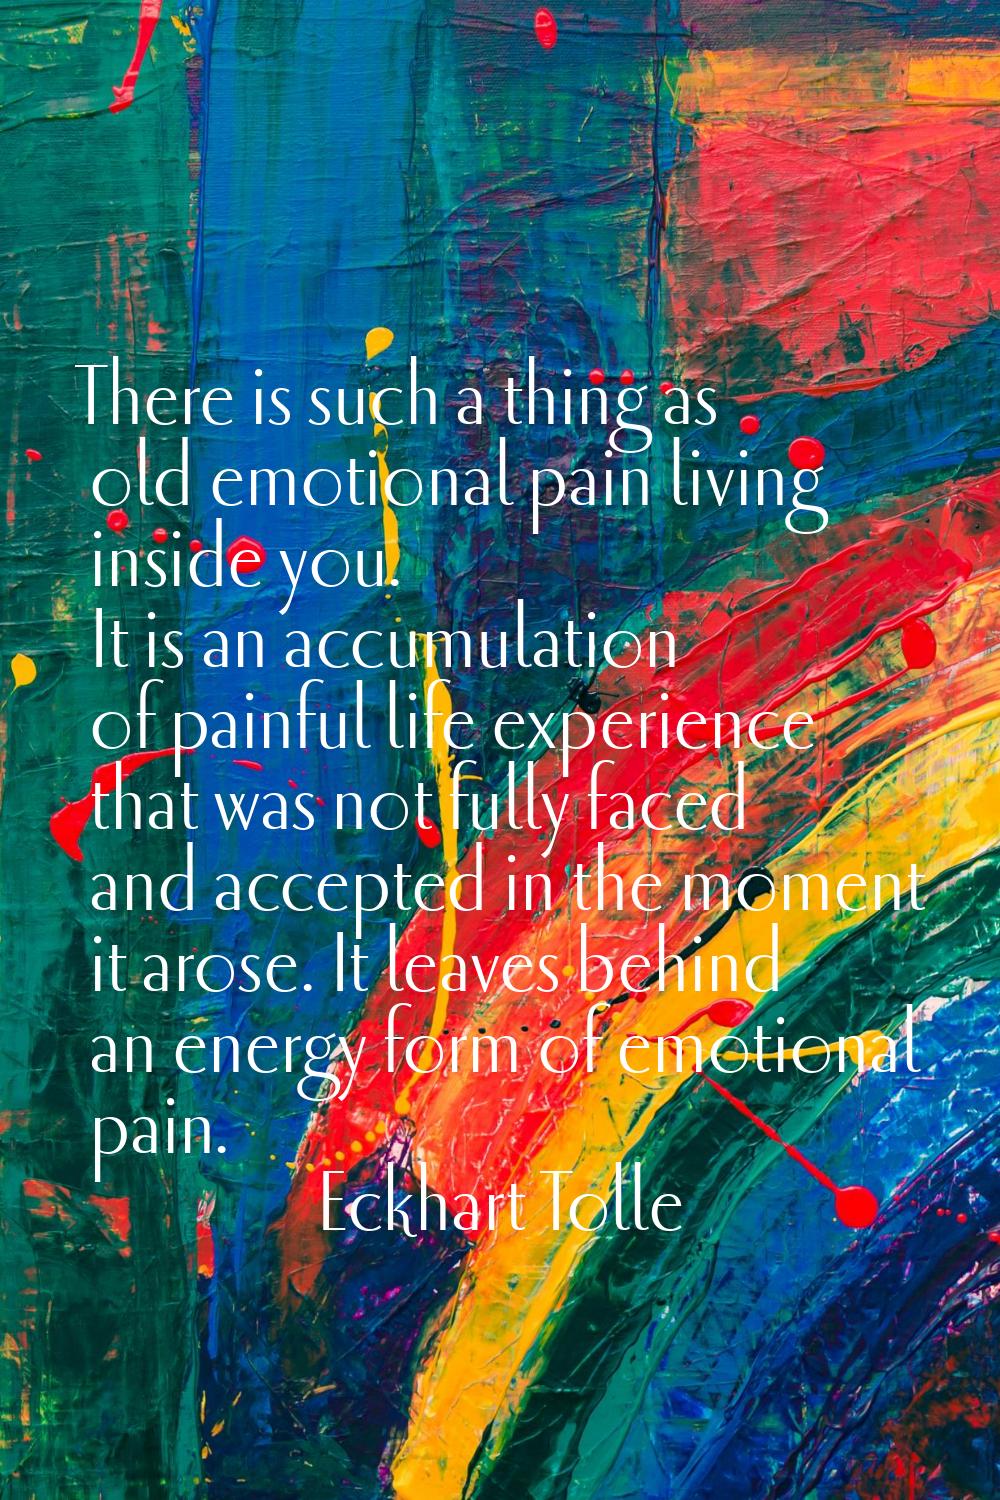 There is such a thing as old emotional pain living inside you. It is an accumulation of painful lif